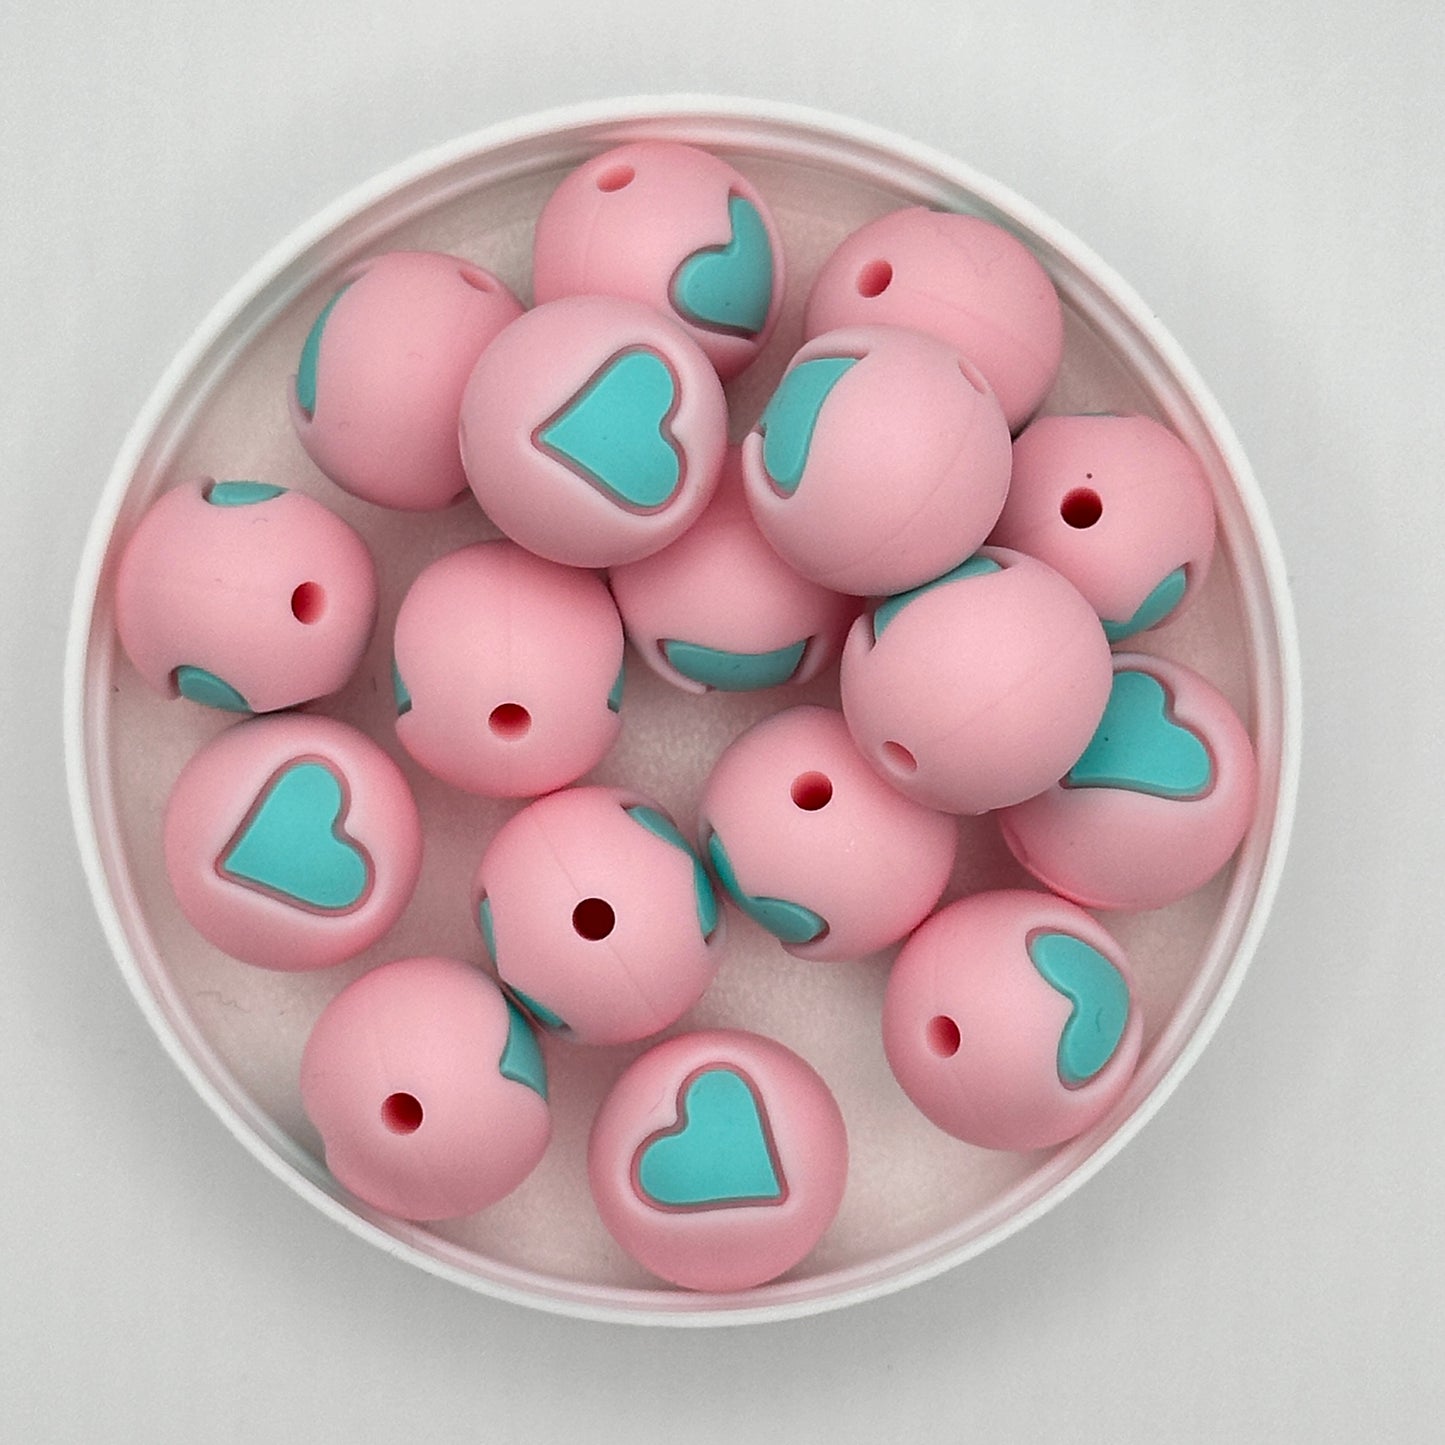 DC Beads: 1/2 Tray Heart Silicone Beads